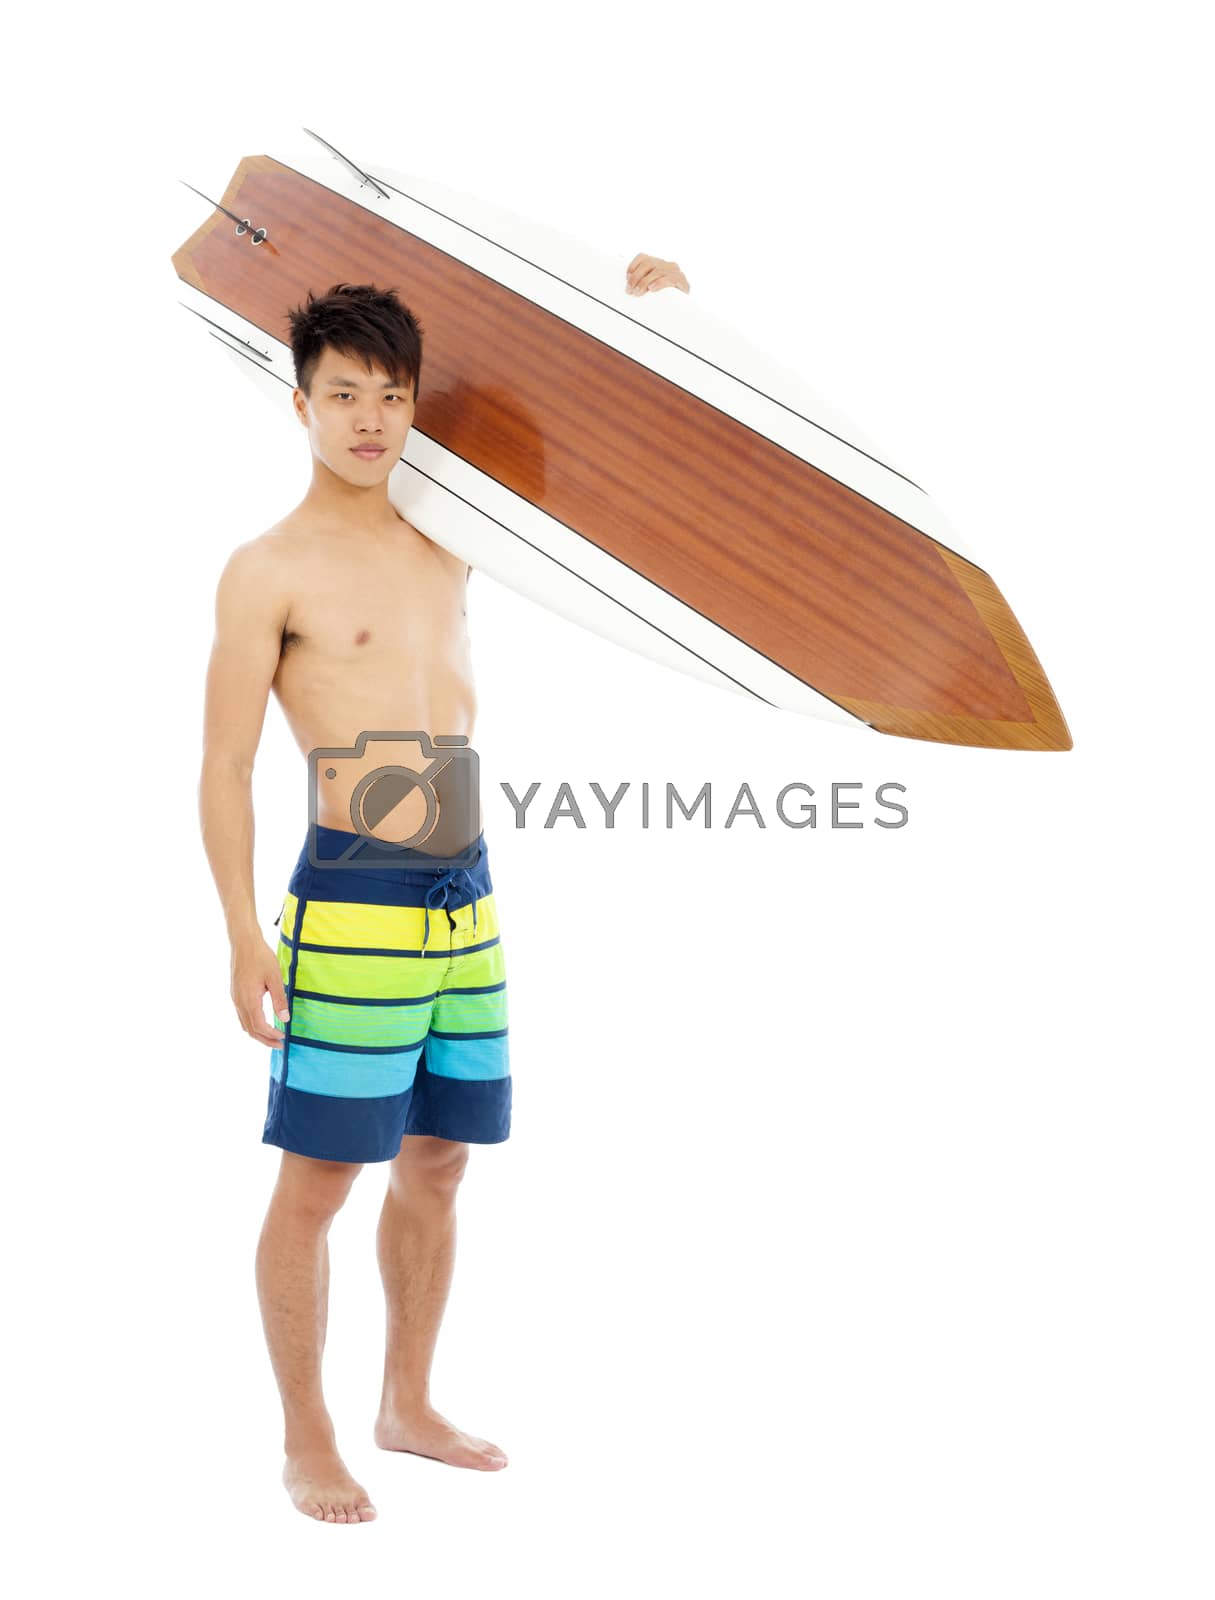 Royalty free image of sunny surfer put surfboard on the shoulder by tomwang